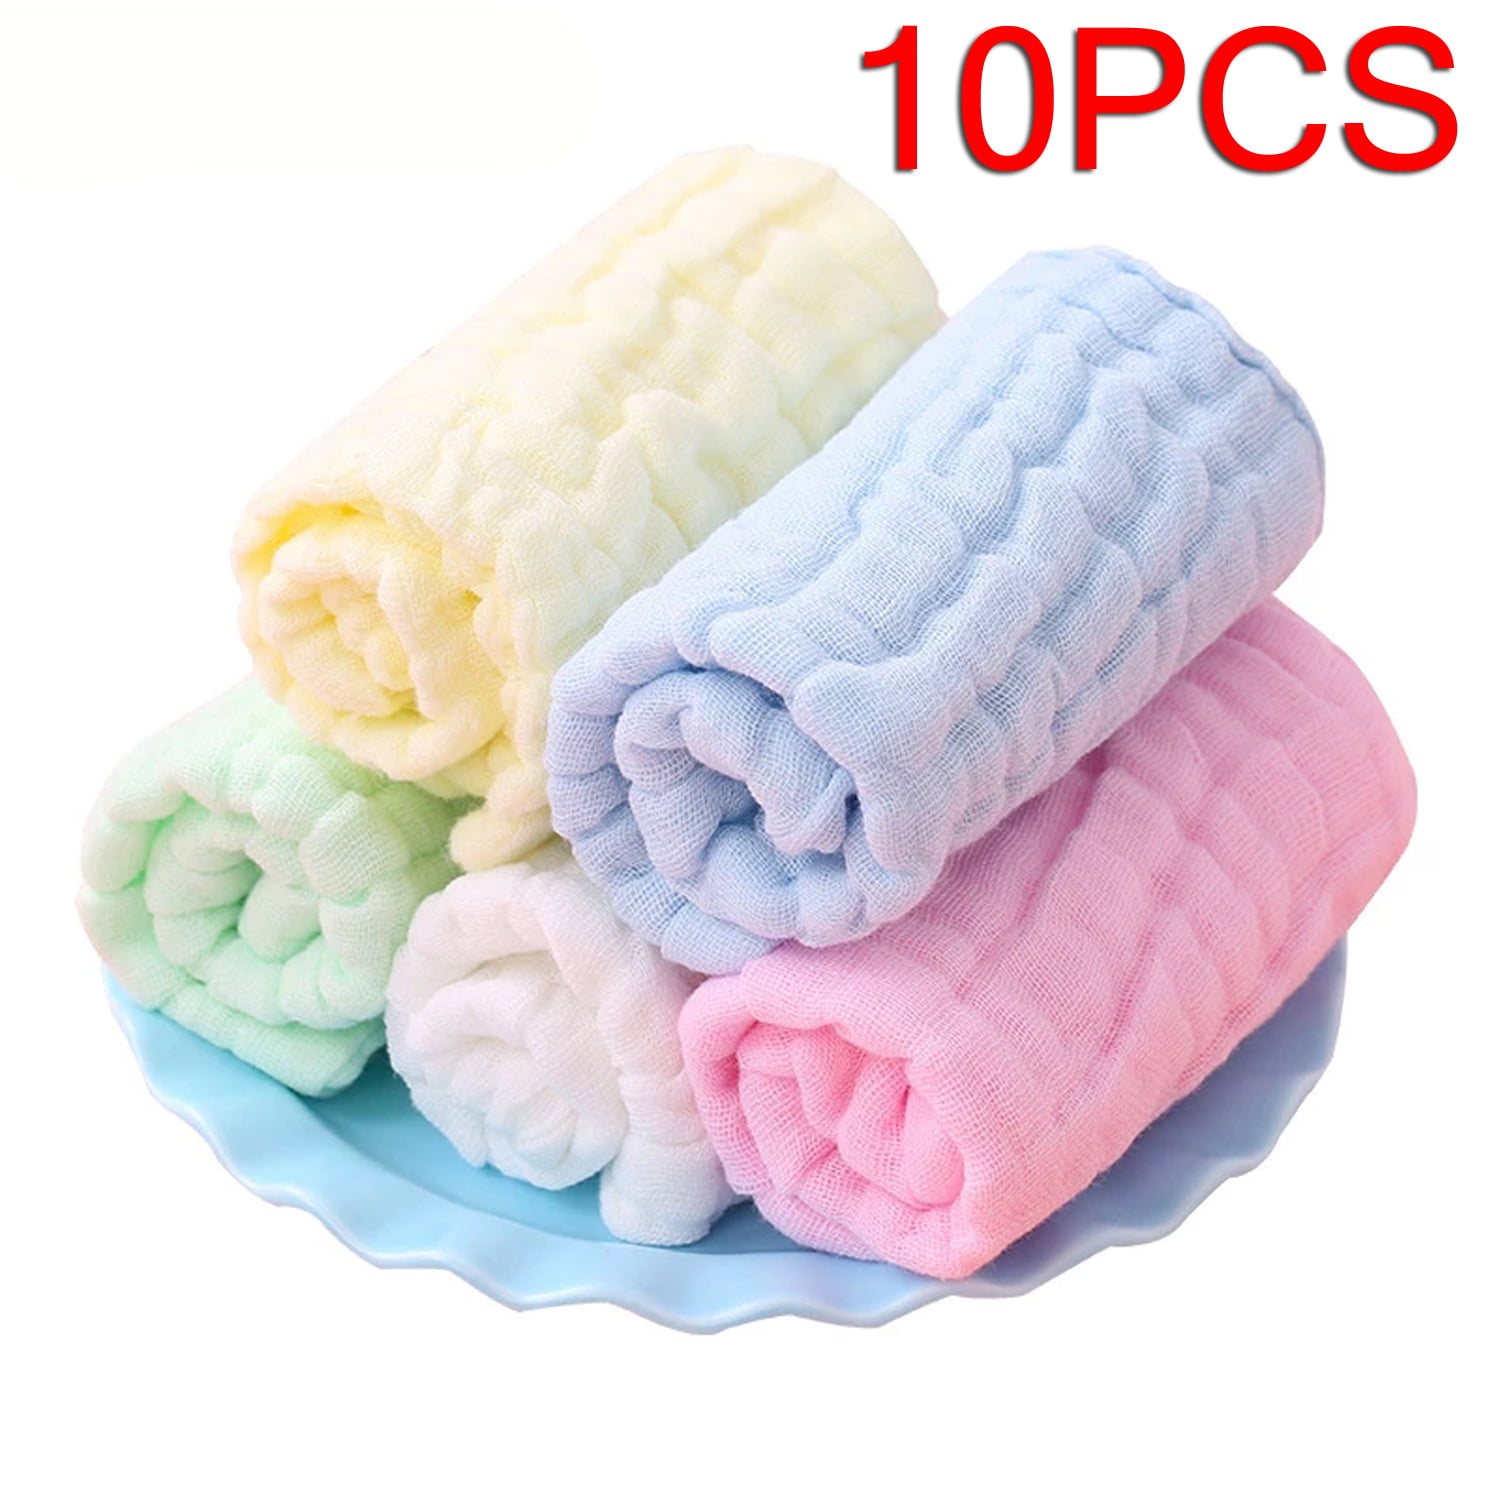 1-100 Soft Absorbent Wash Cloth Car Auto Care Microfiber Cleaning Towels Tool 